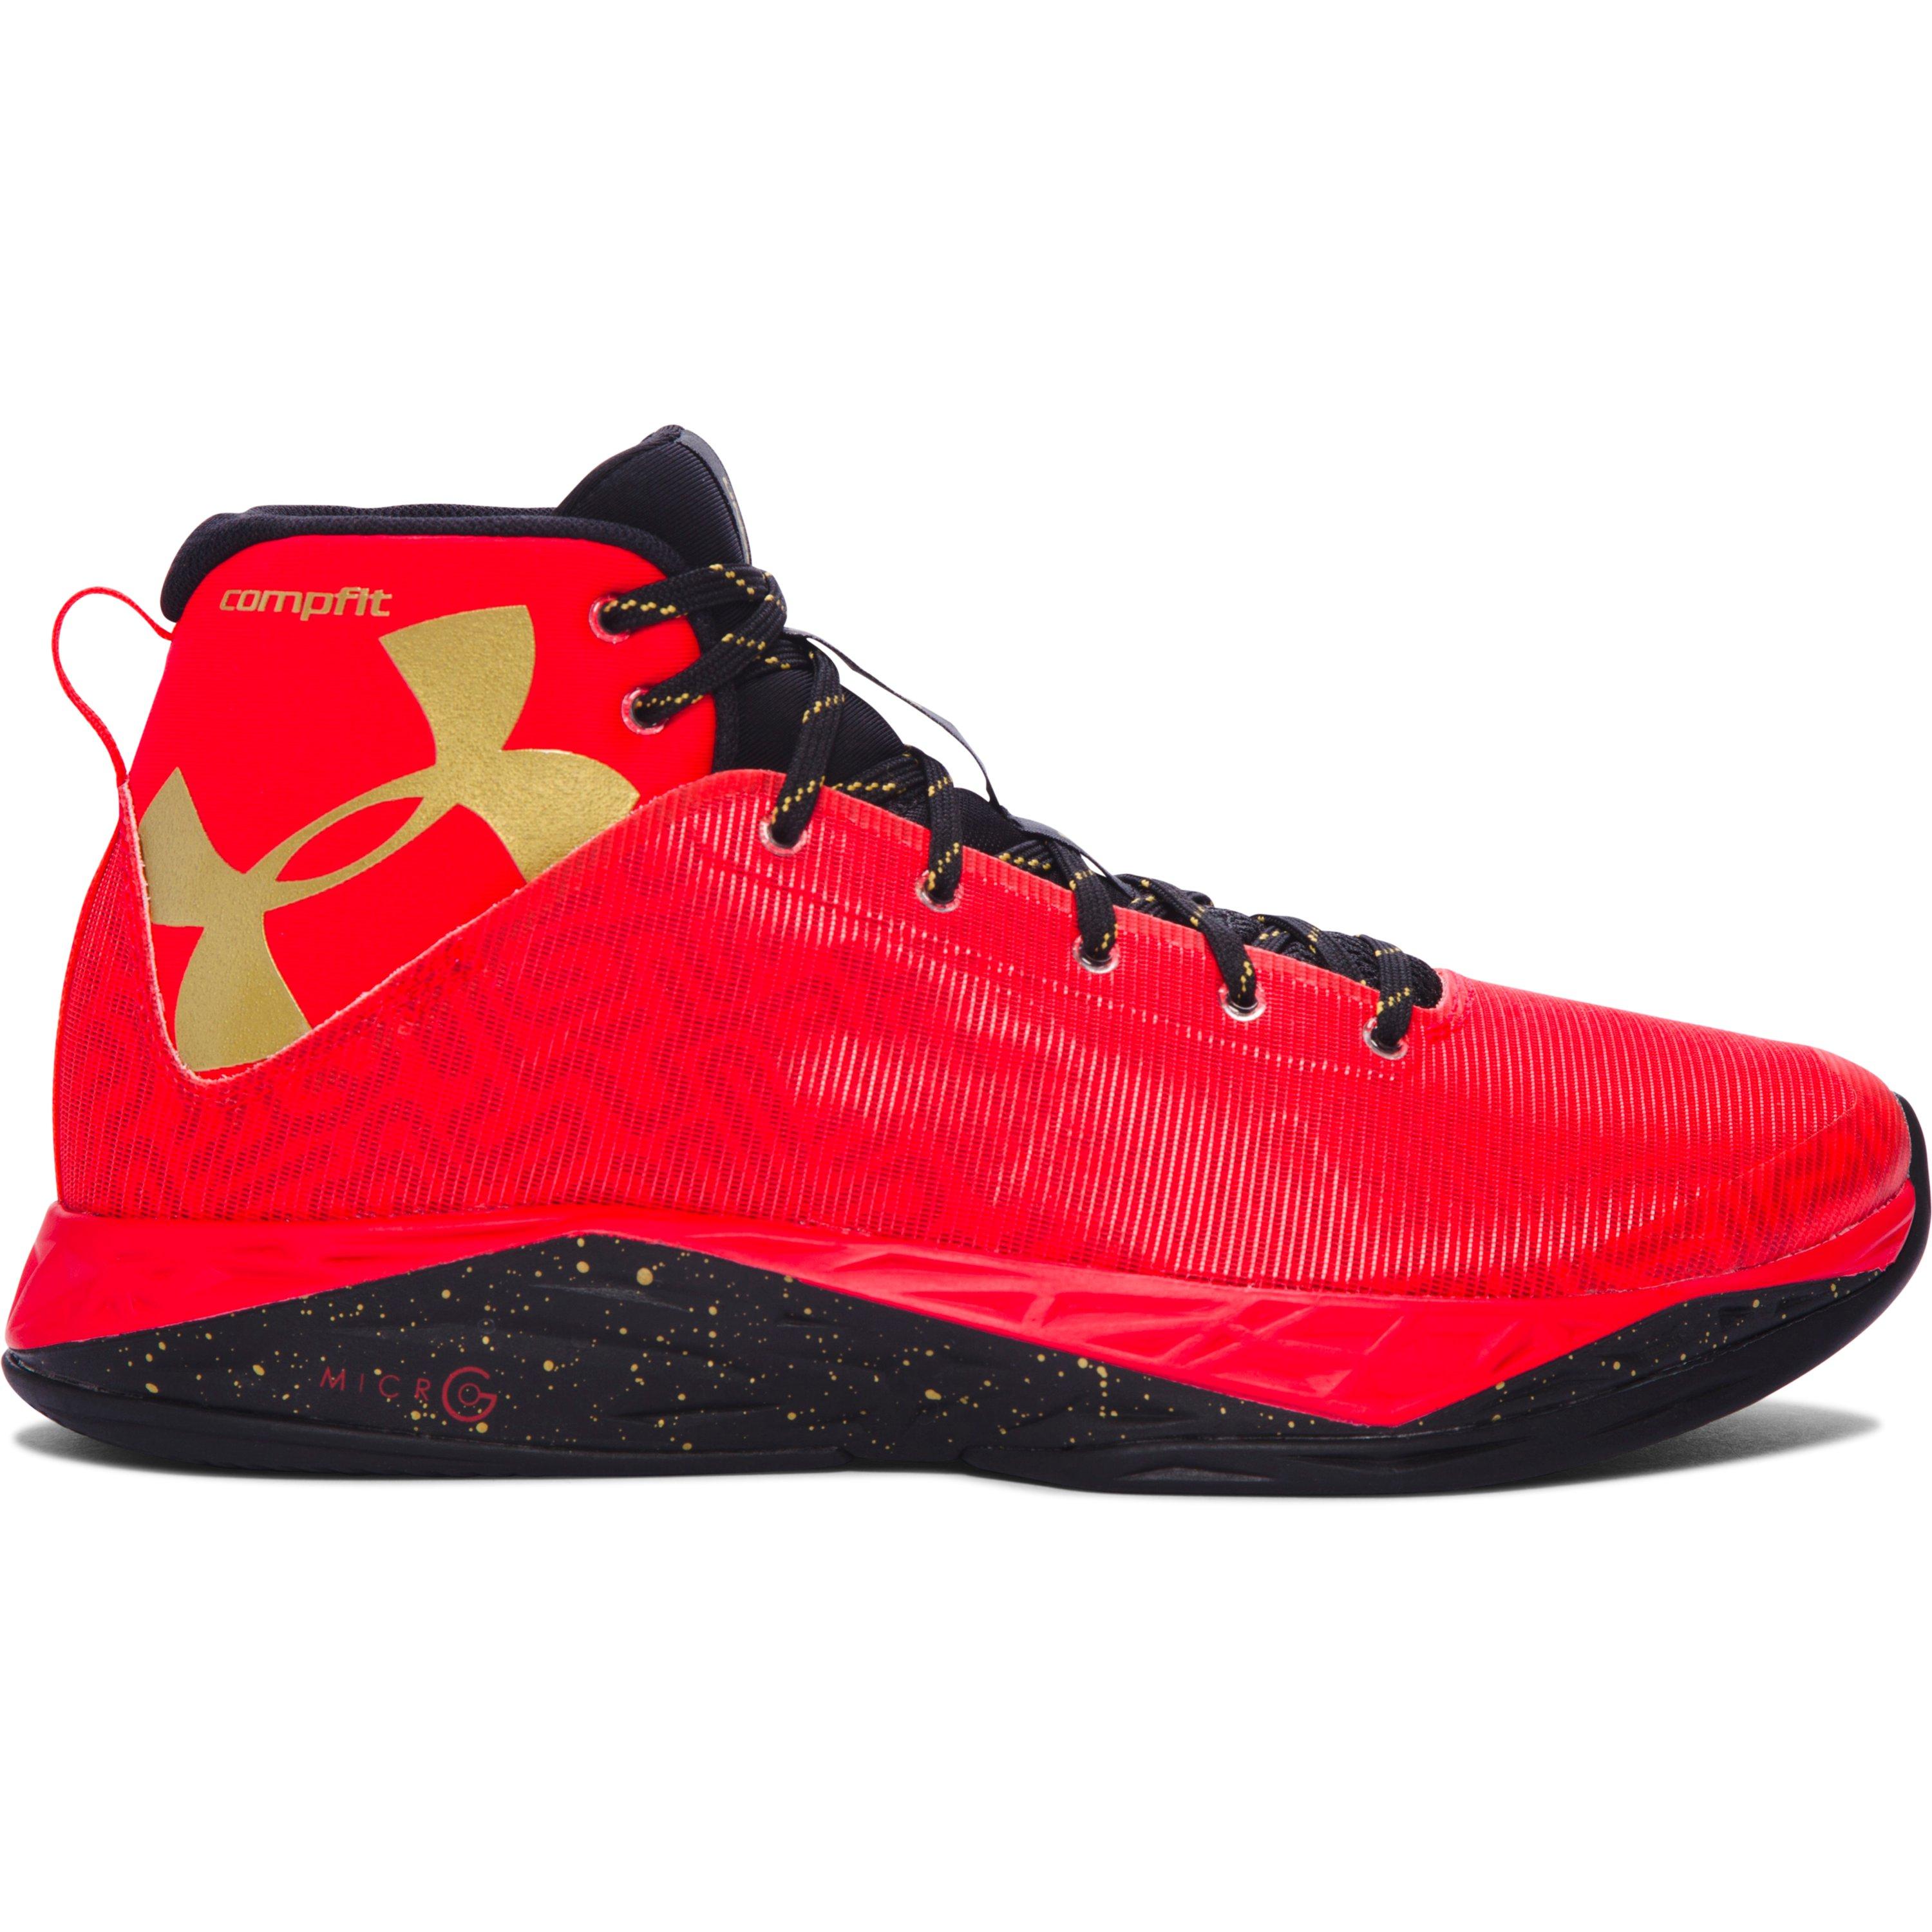 Lyst - Under Armour Men's Ua Fireshot Basketball Shoes in Red for Men